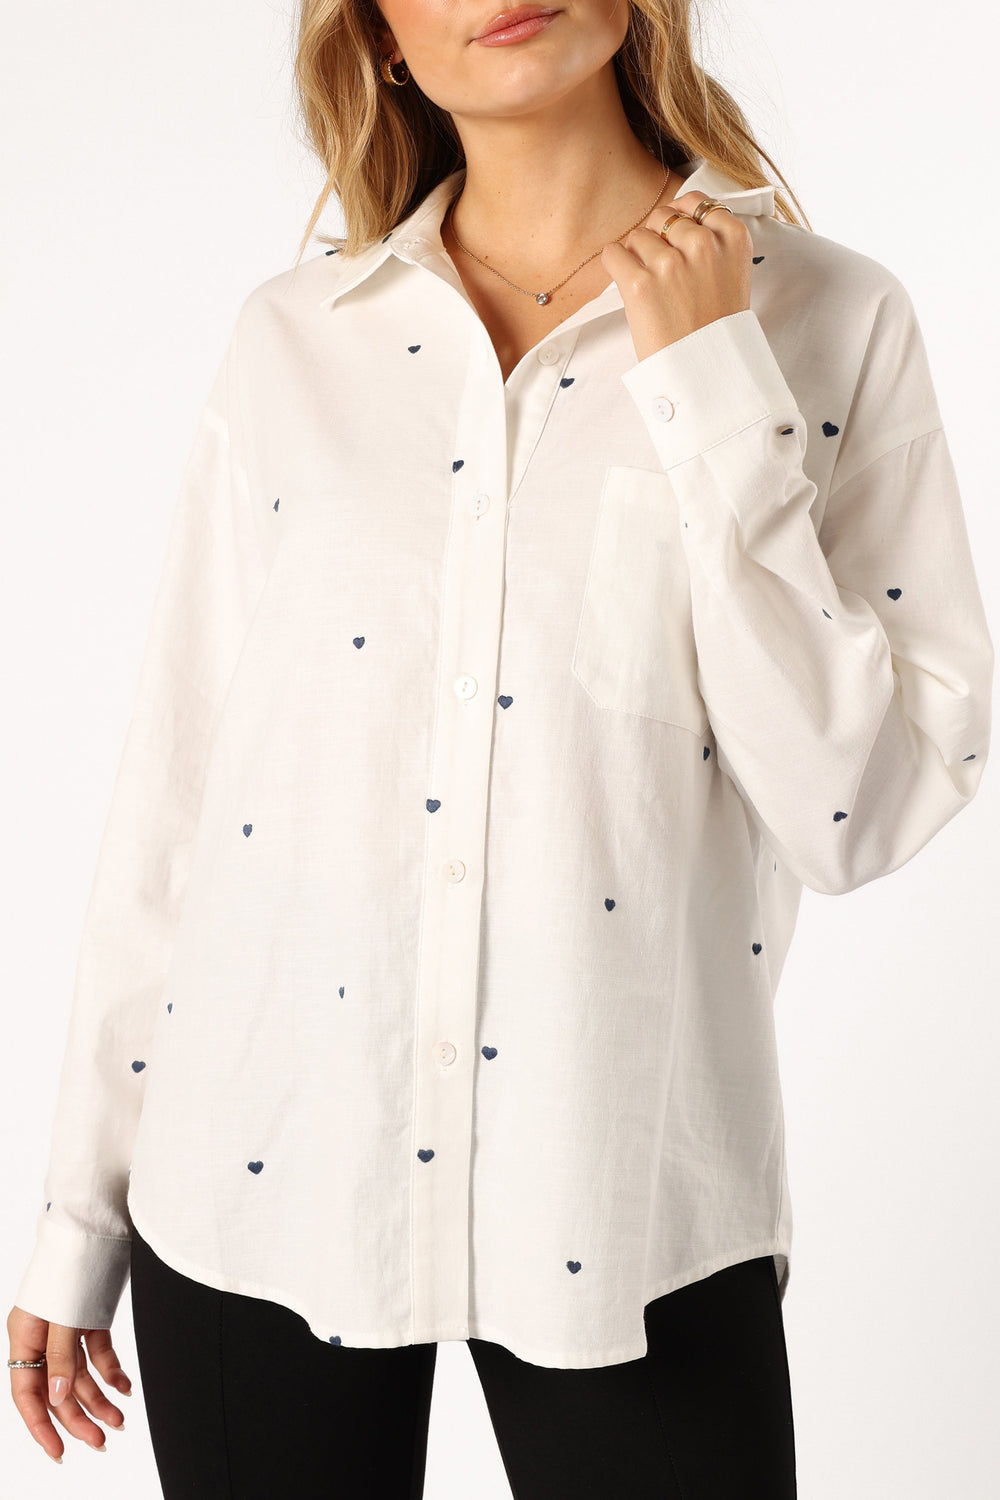 Petal and Pup USA TOPS Avah Button Down Top - White